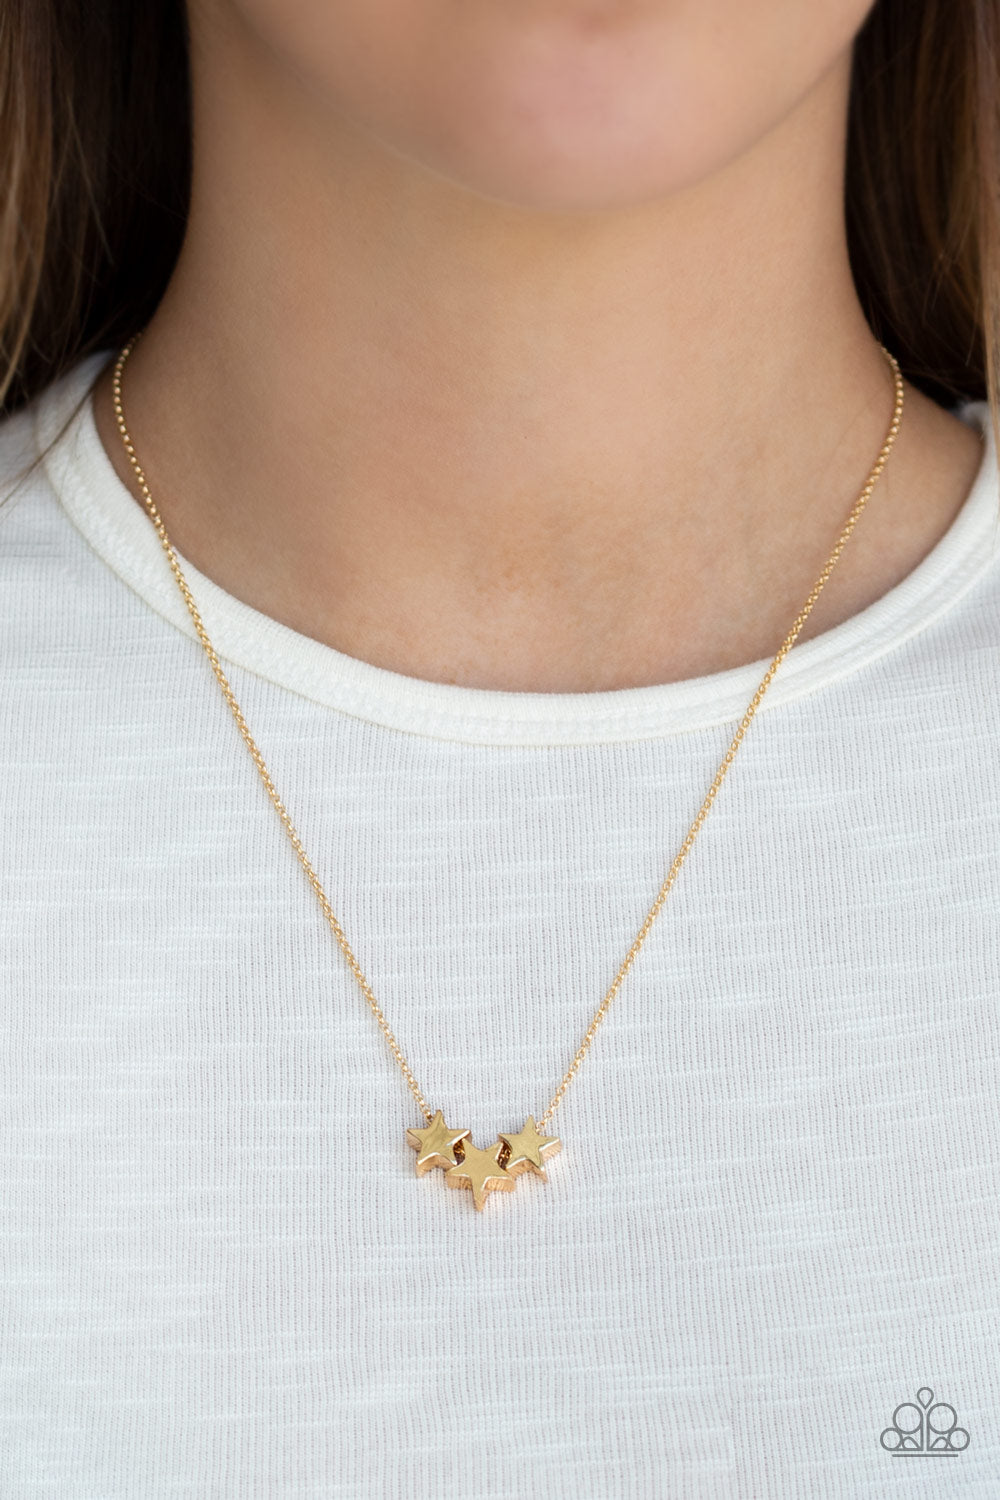 SHOOT FOR THE STARS - GOLD STARS NECKLACE